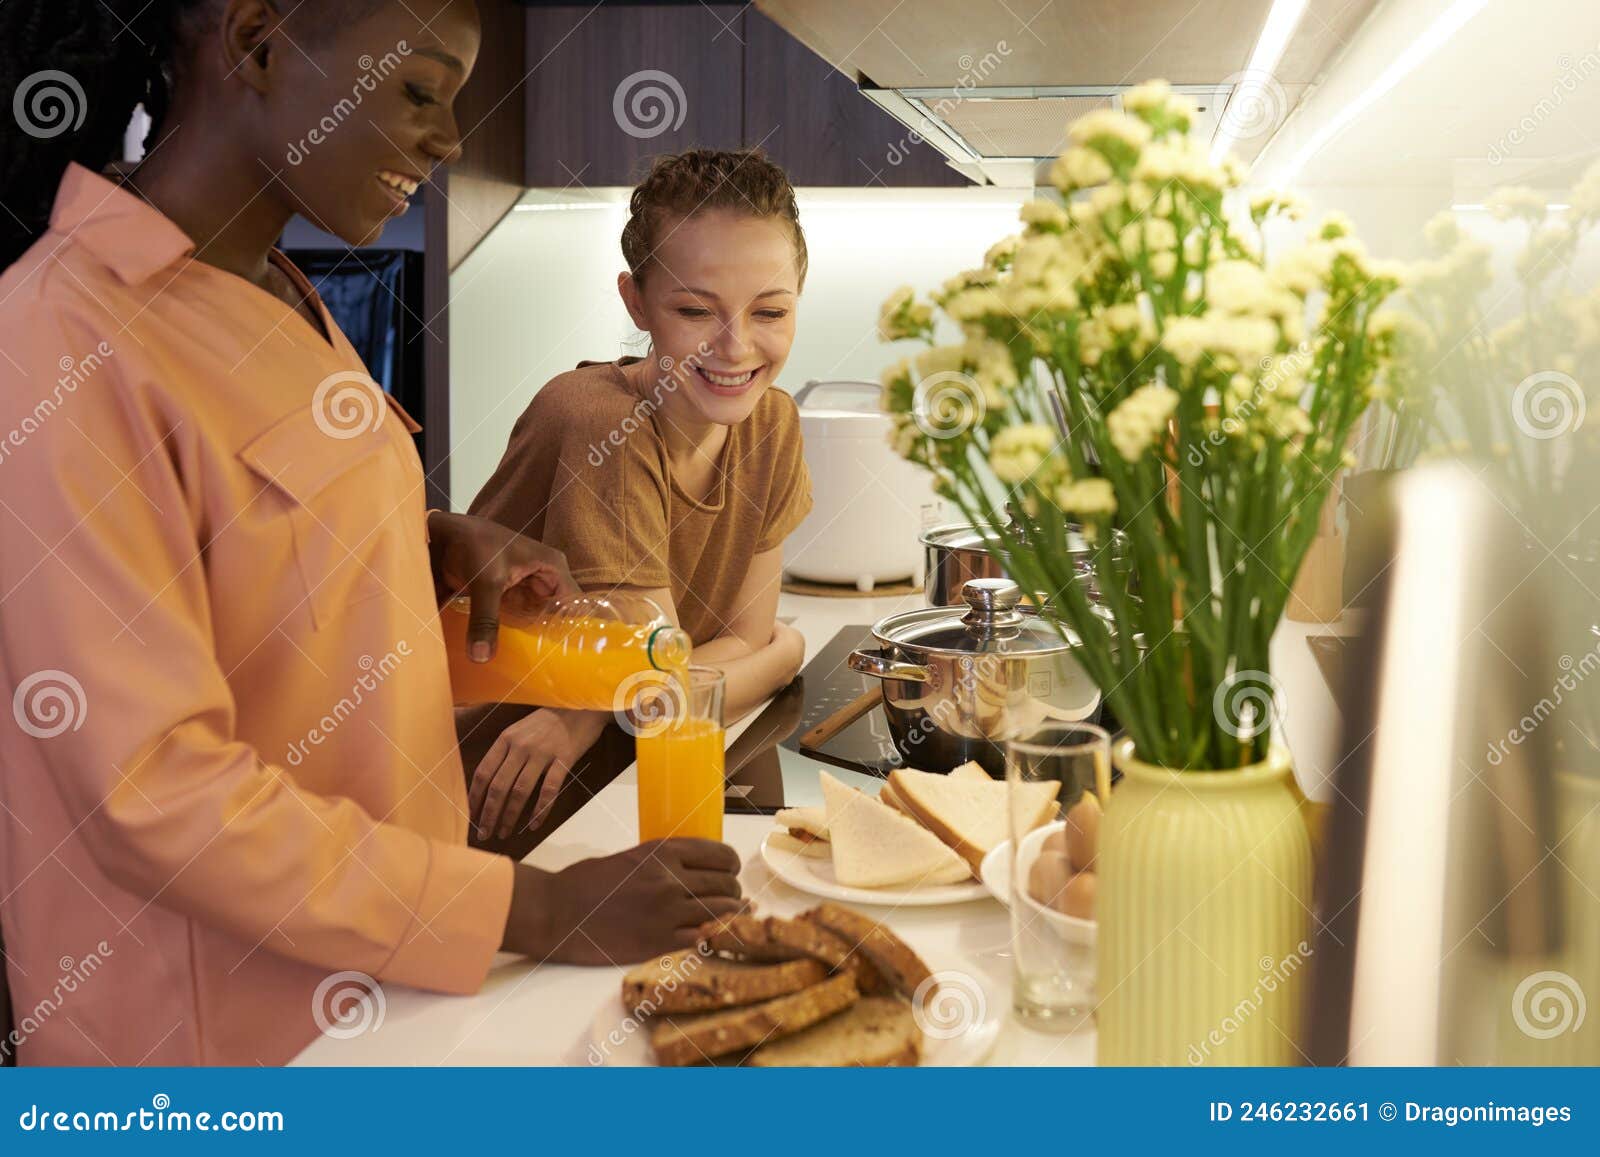 Lesbian Couple Making Breakfast Stock Image Image Of Happiness Lgbt 246232661